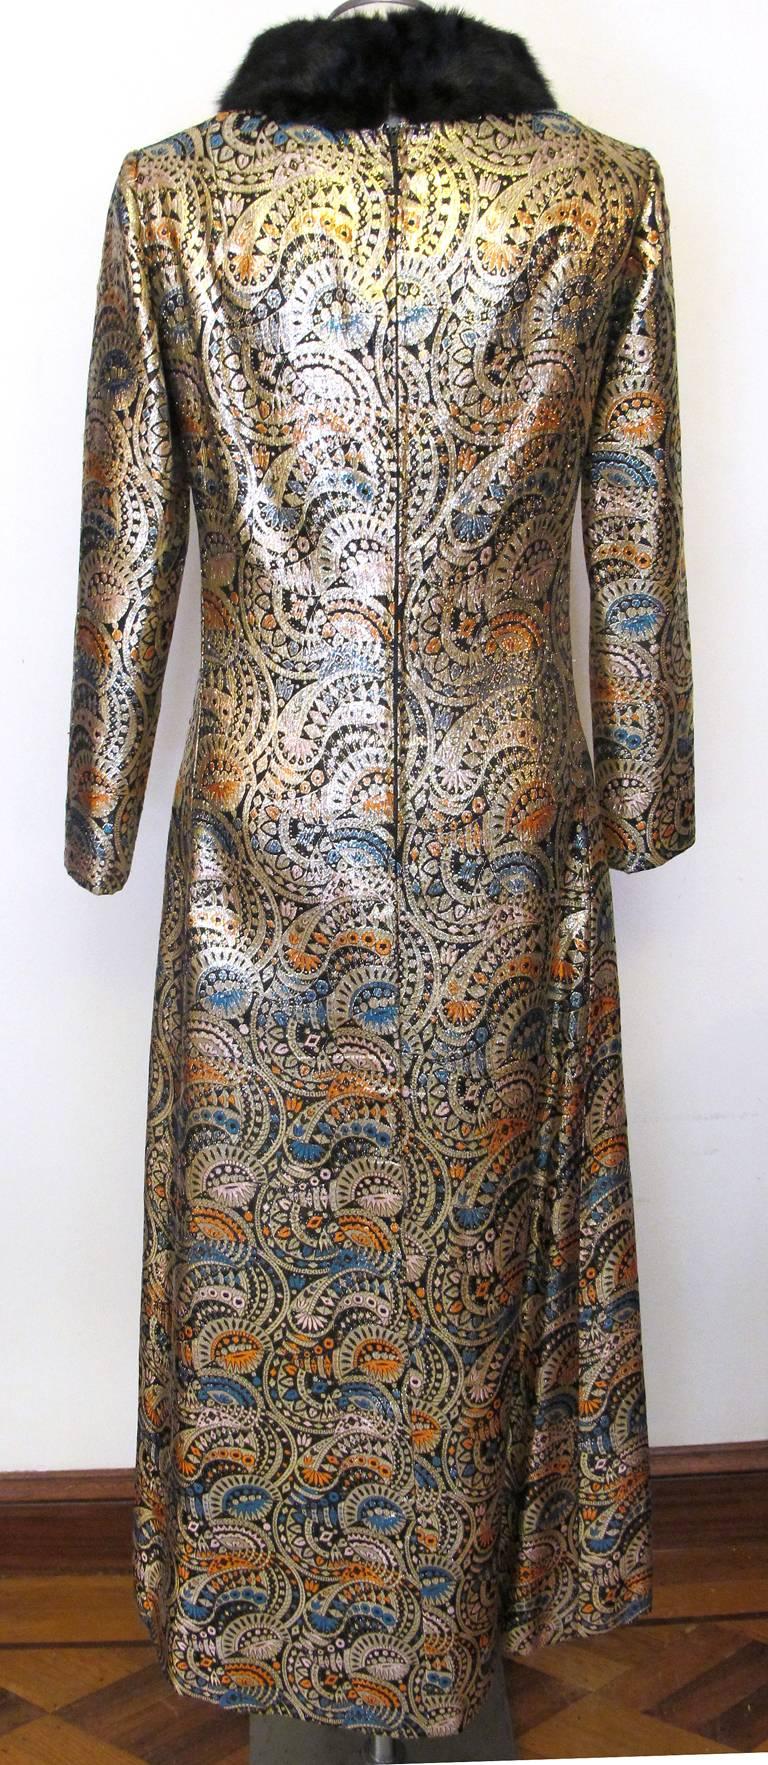 1970's Malcolm Starr Gold Metallic Brocade Evening Gown with Black Mink Trim  For Sale 1